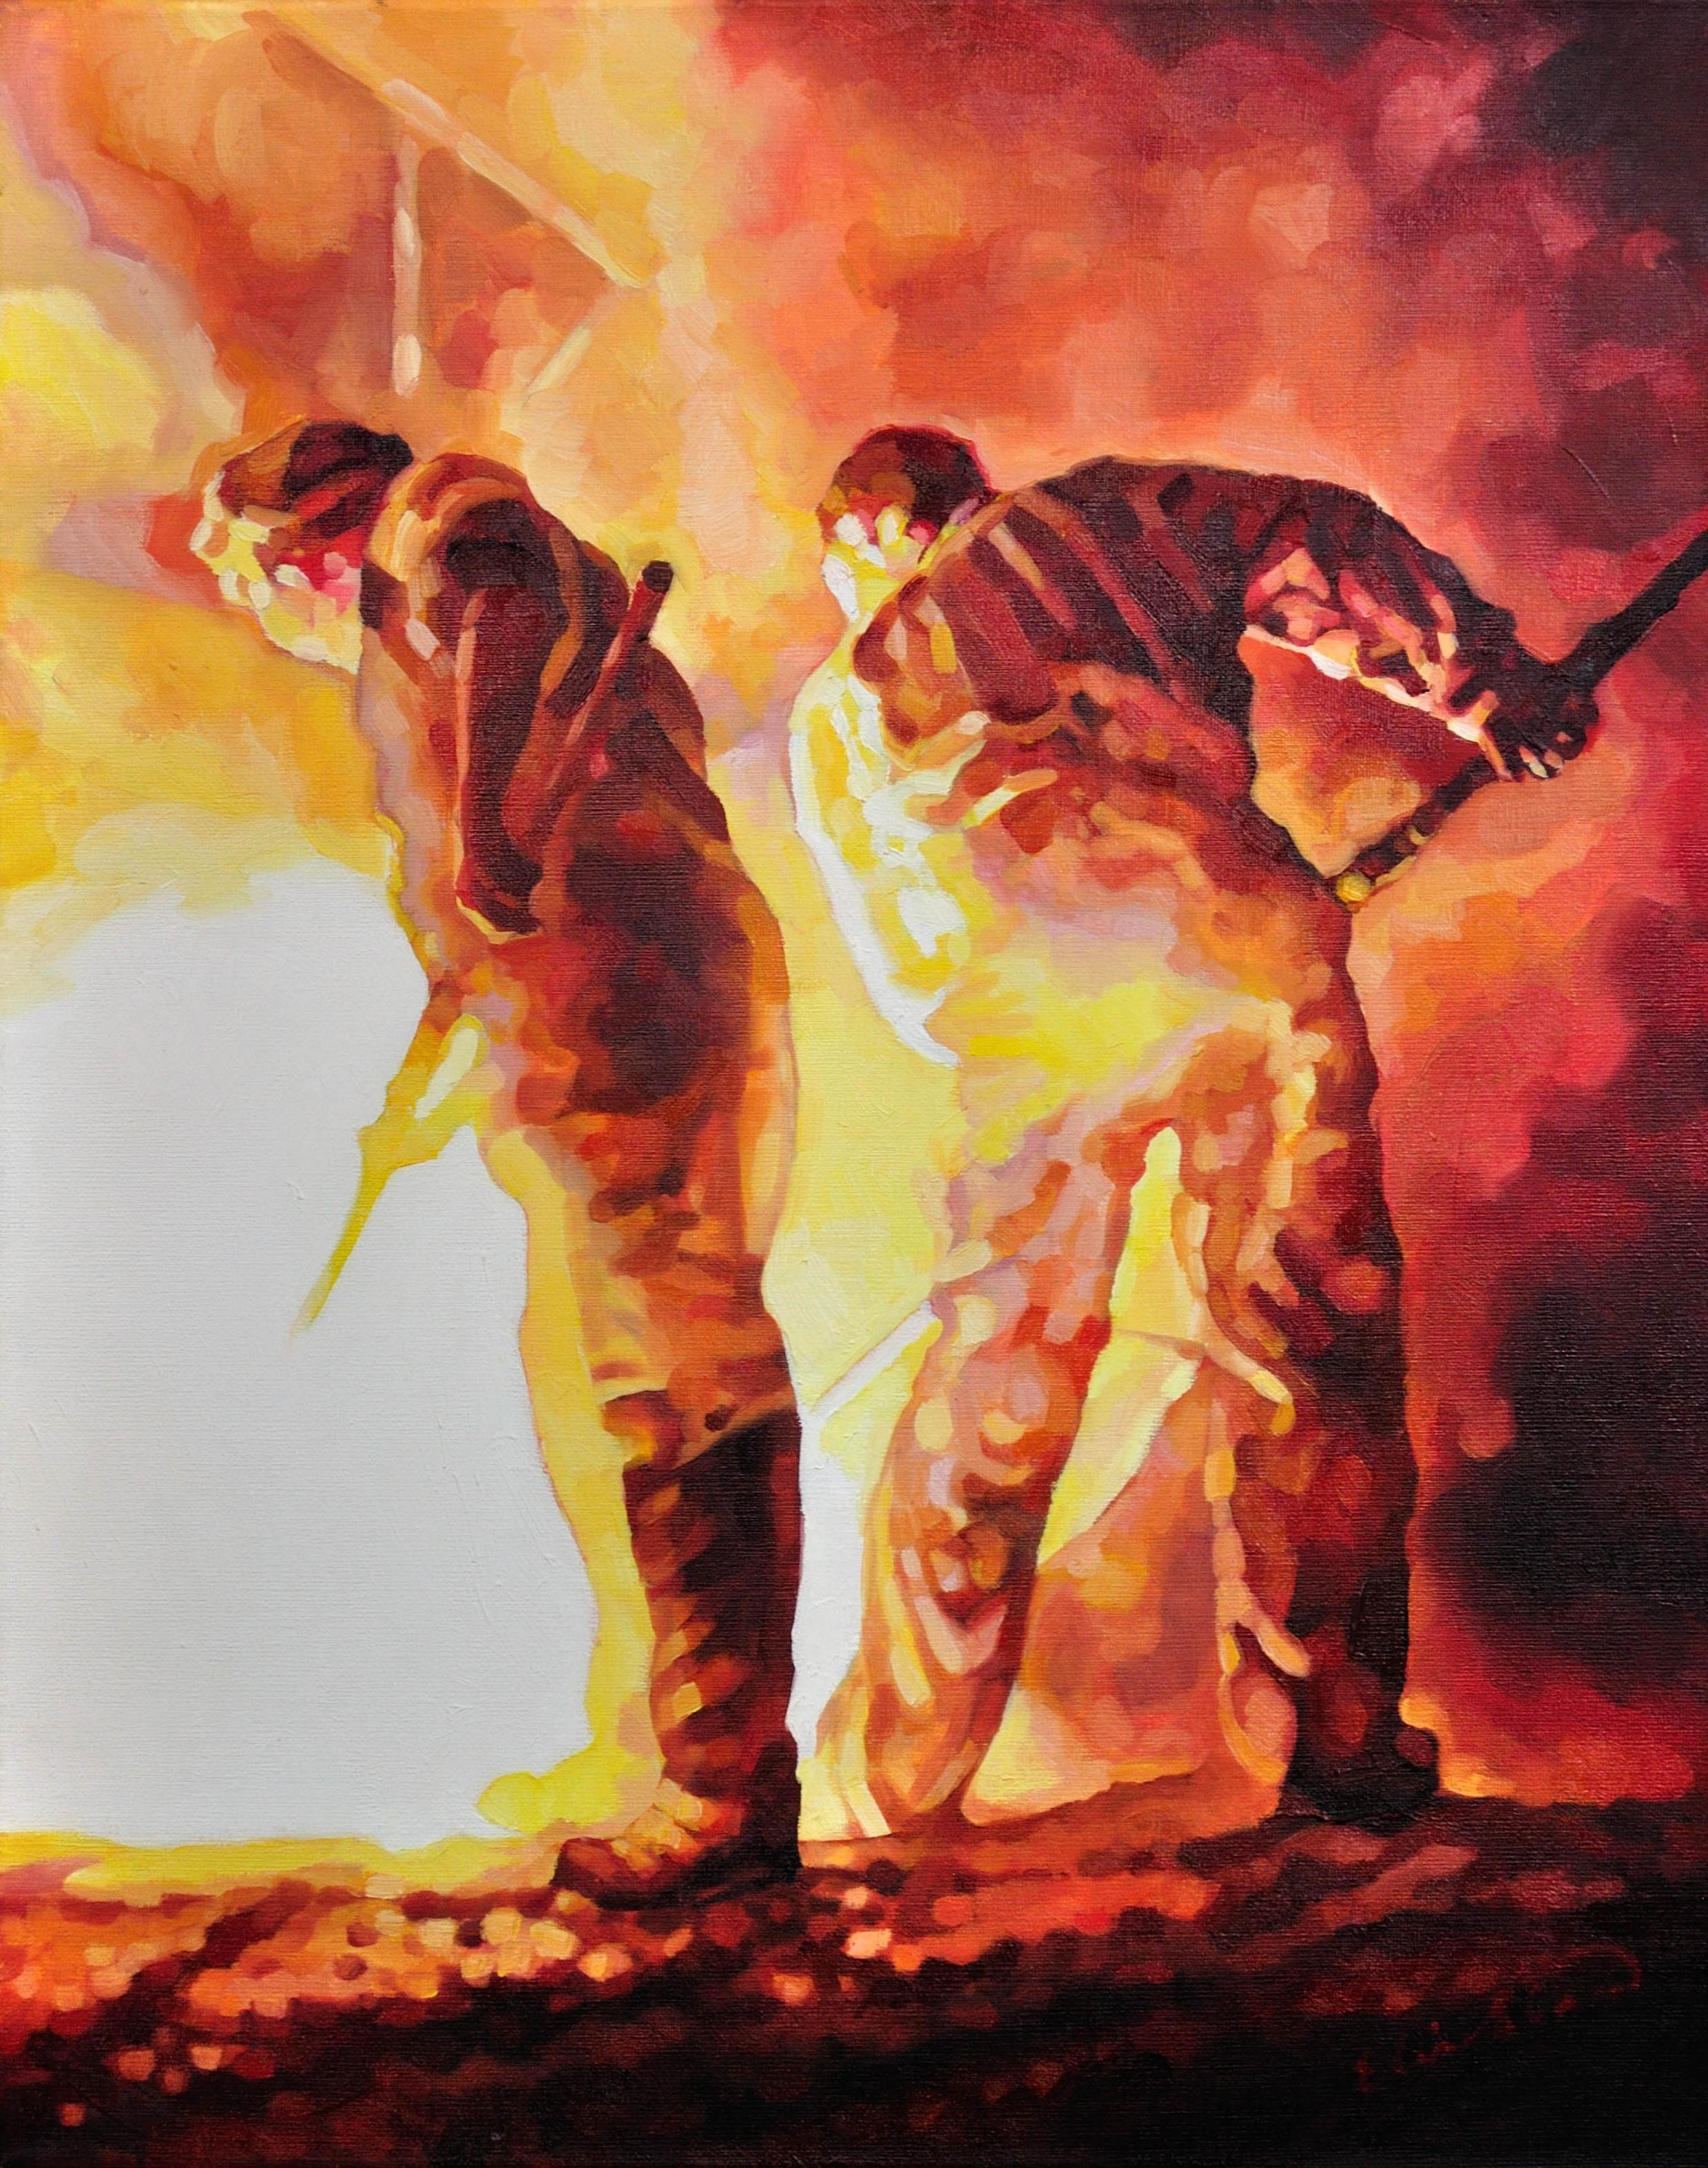 Iron Puddlers. South Wales Valleys. Steel Workers. Metalworkers. Heavy Industry. - Painting by Elin Sian Blake